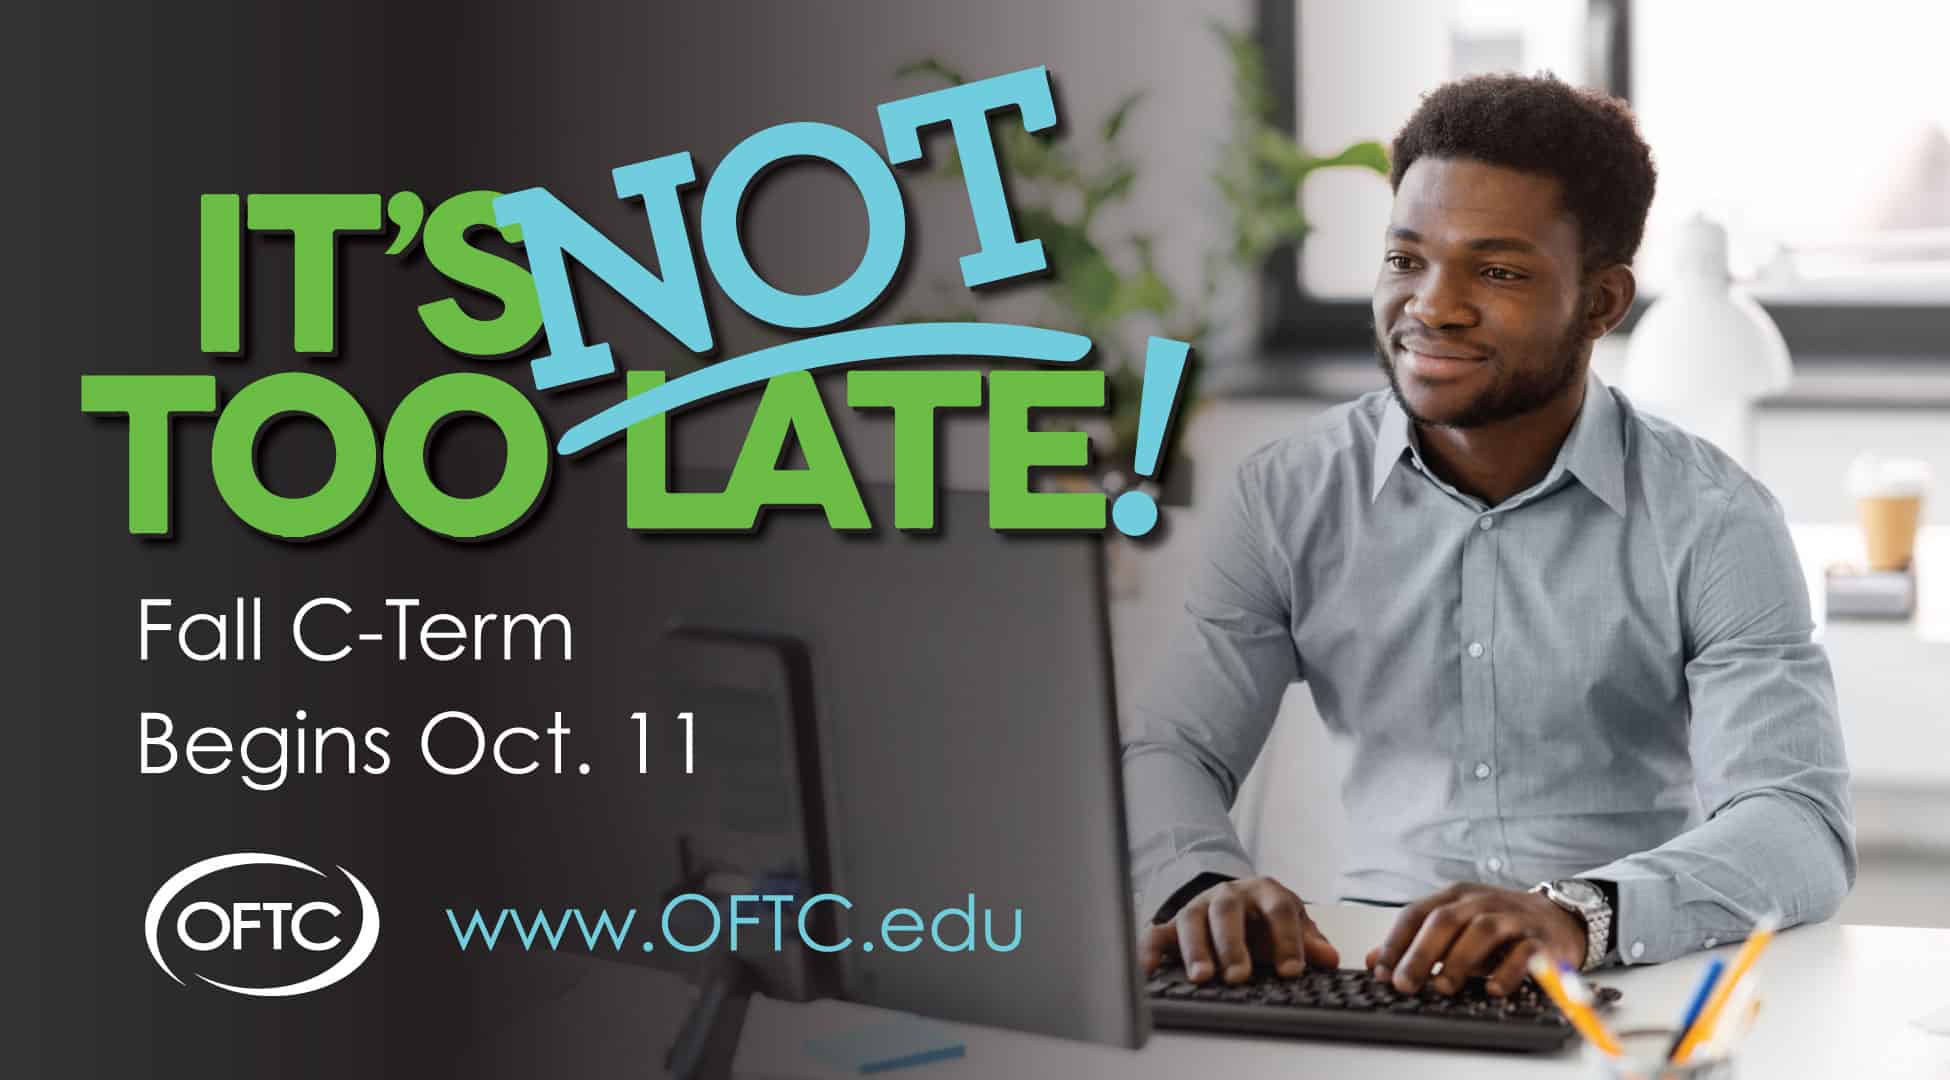 Man sitting at computer, "It's Not Too Late" Oct 11 CTerm Start